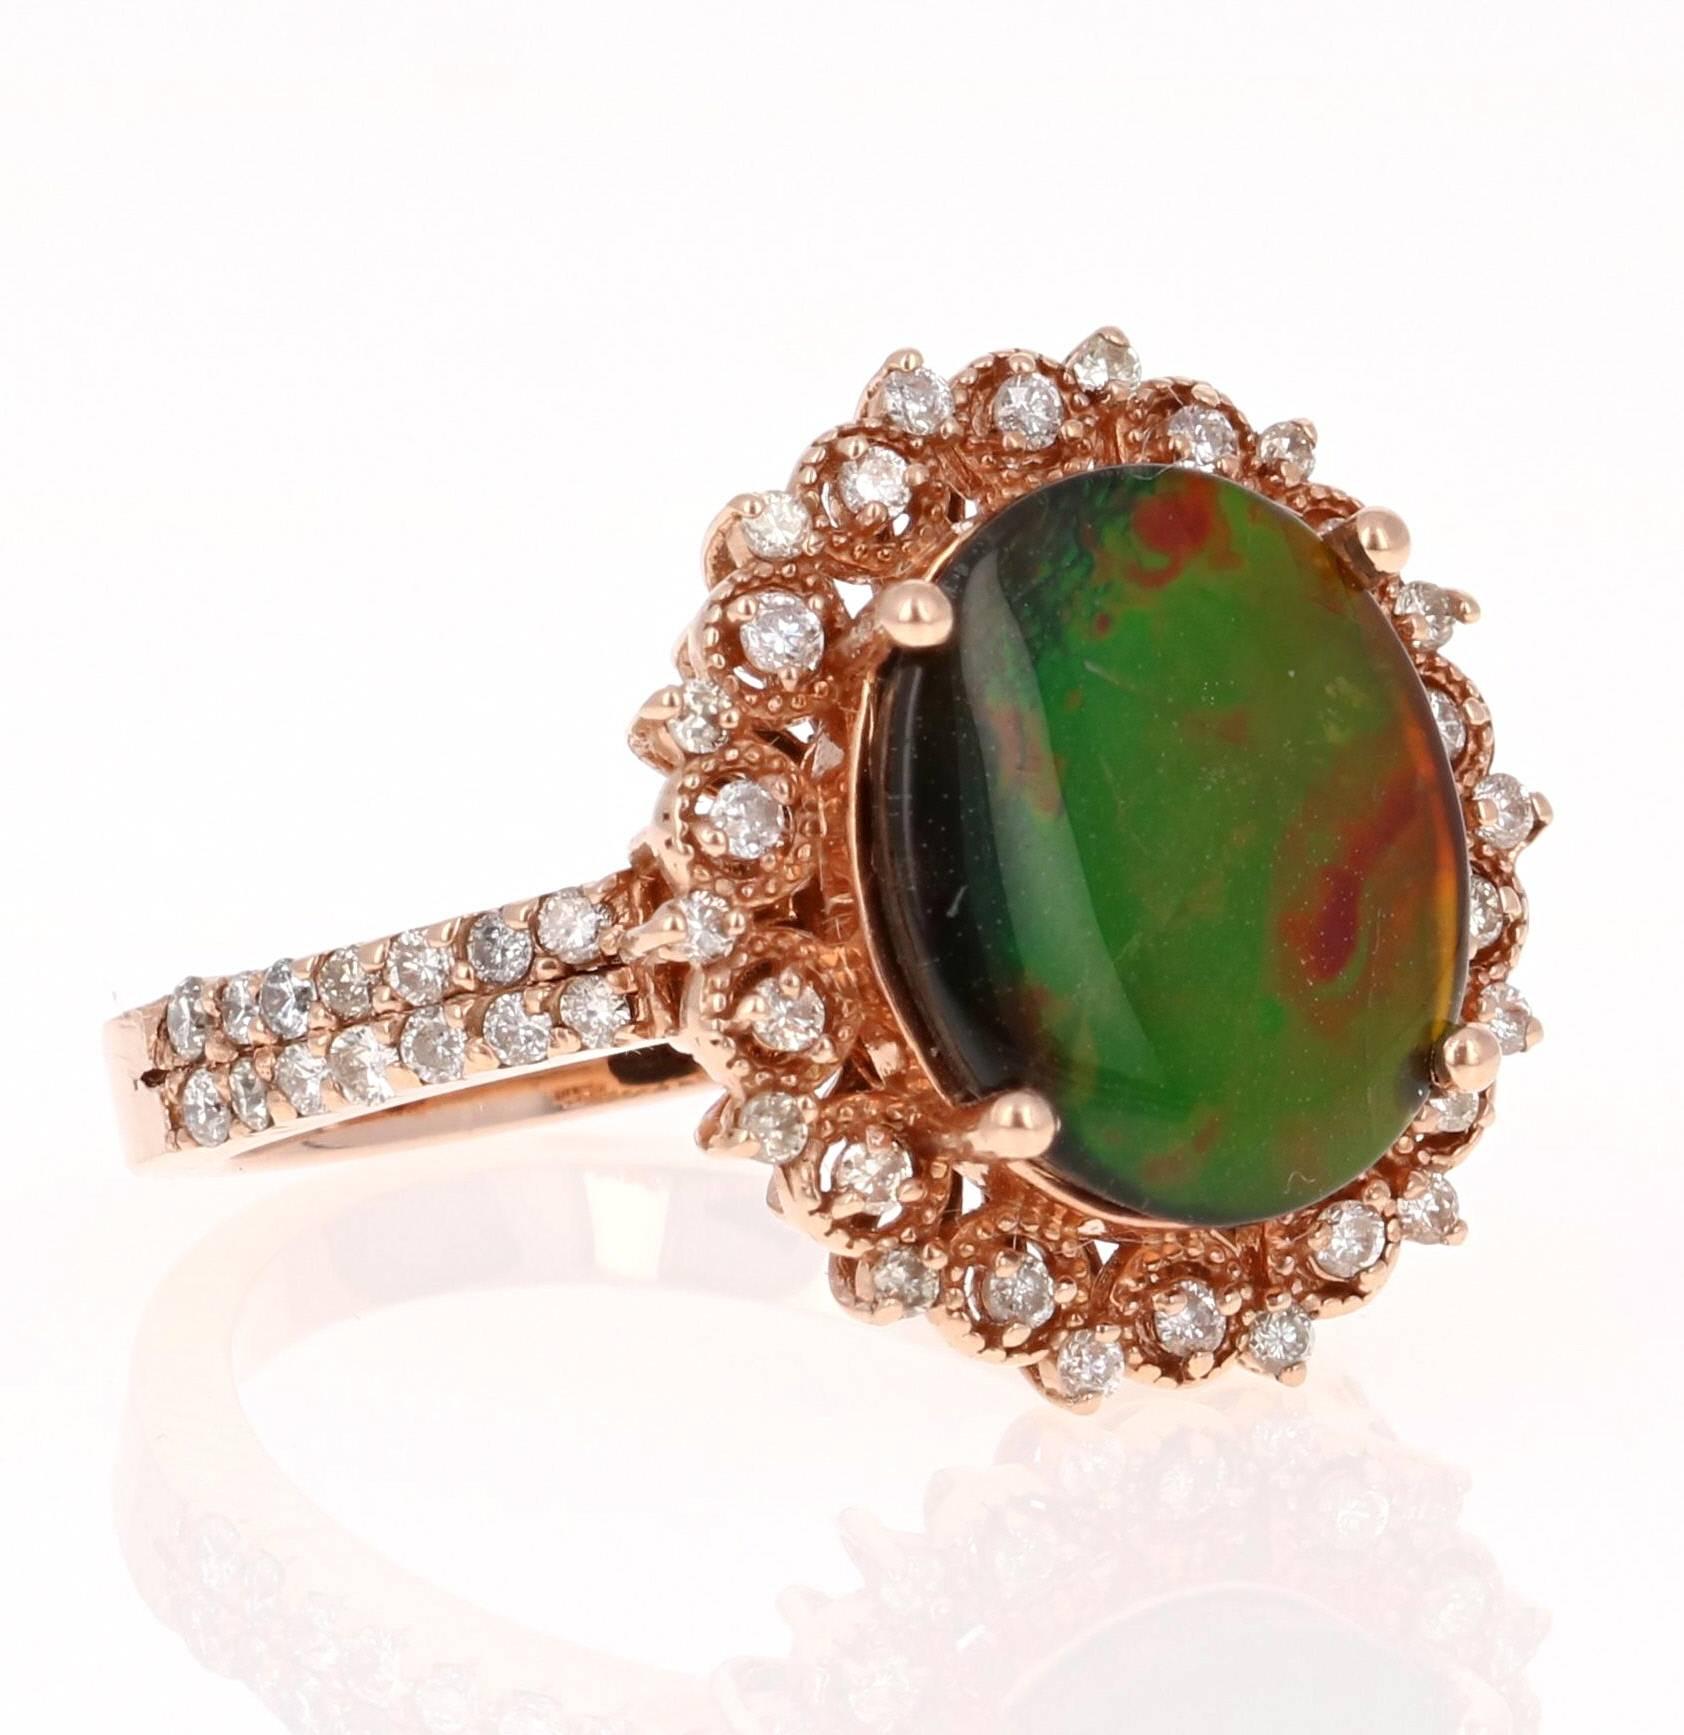 This unique ring has a 2.67 Carat Oval Cut Ammolite in the center of the ring.  Ammolite is an Opal-like organic gemstone that is primarily found in the eastern slopes of the North American Rocky Mountains. The Ammolite has hues of green, blue,